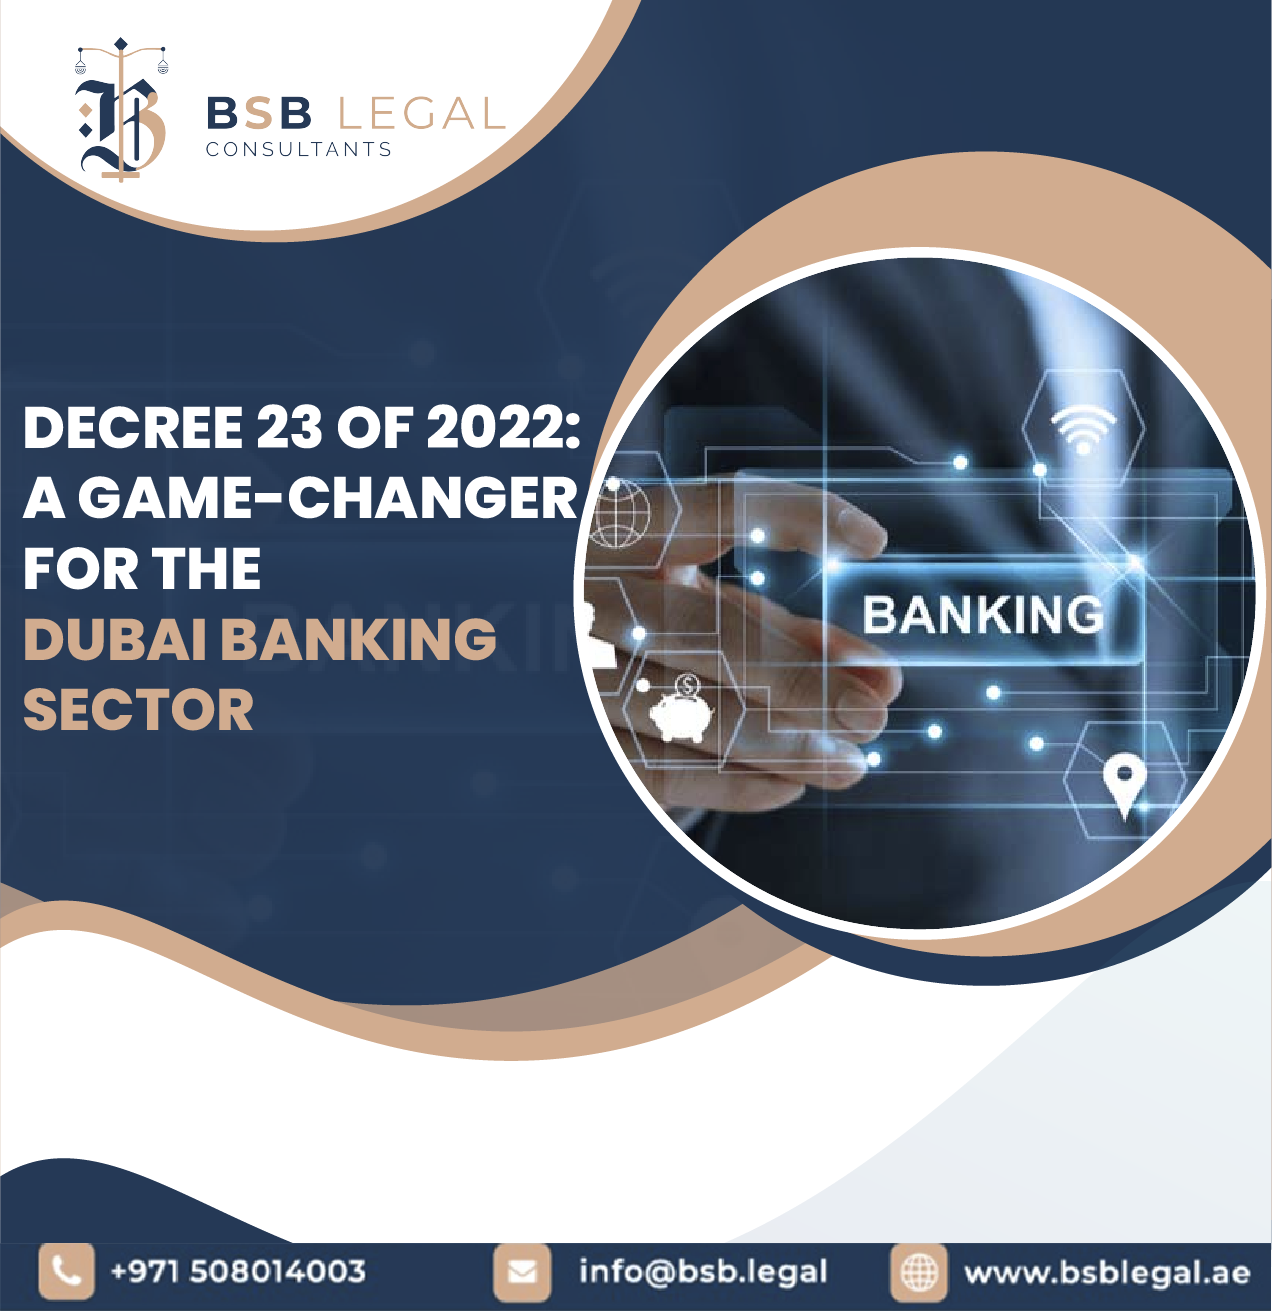 Decree 23 of 2022: A Game-Changer for the Dubai Banking Sector